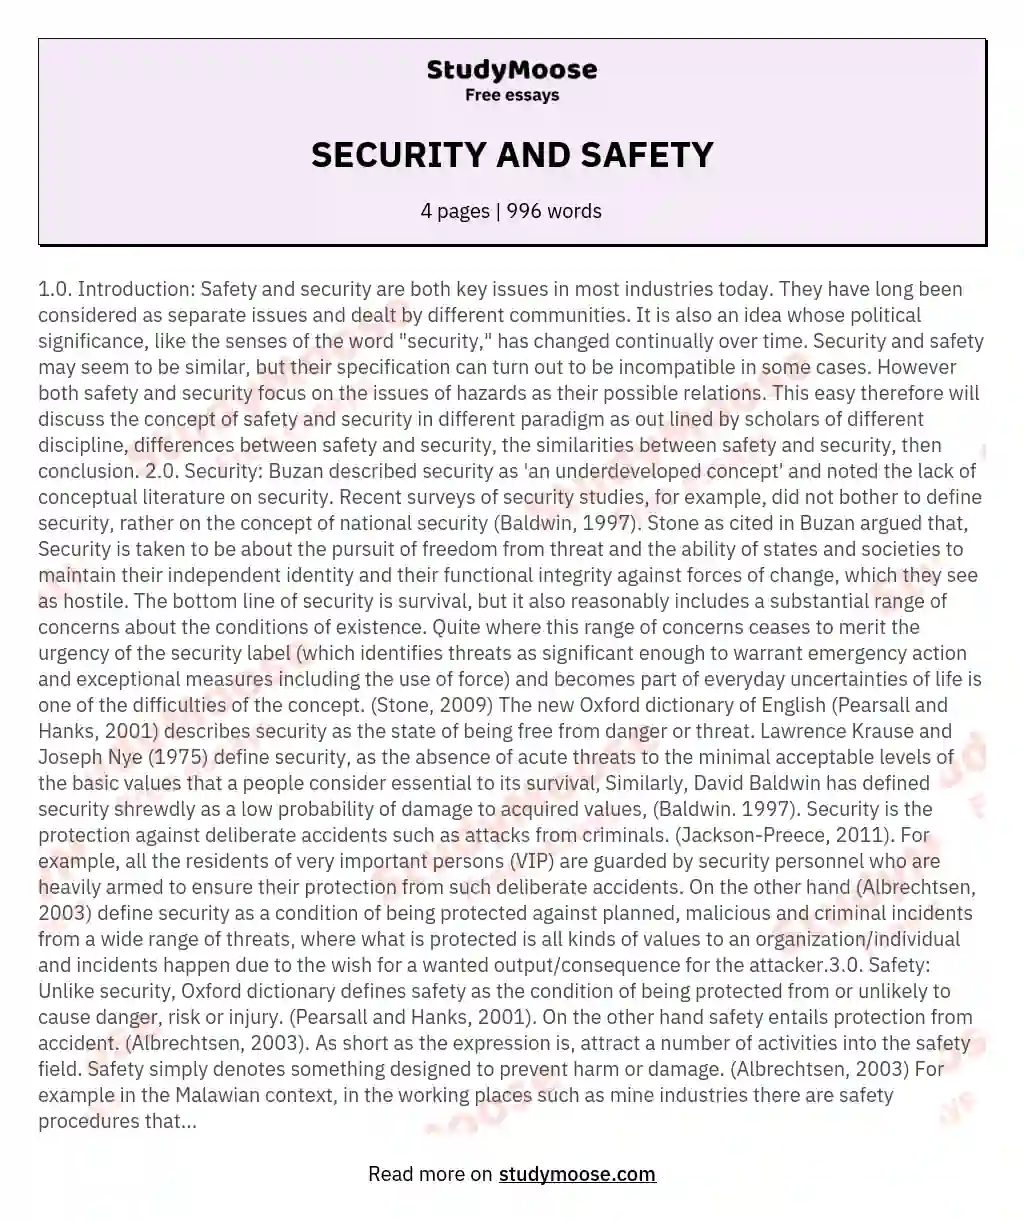 importance of safety and security essay